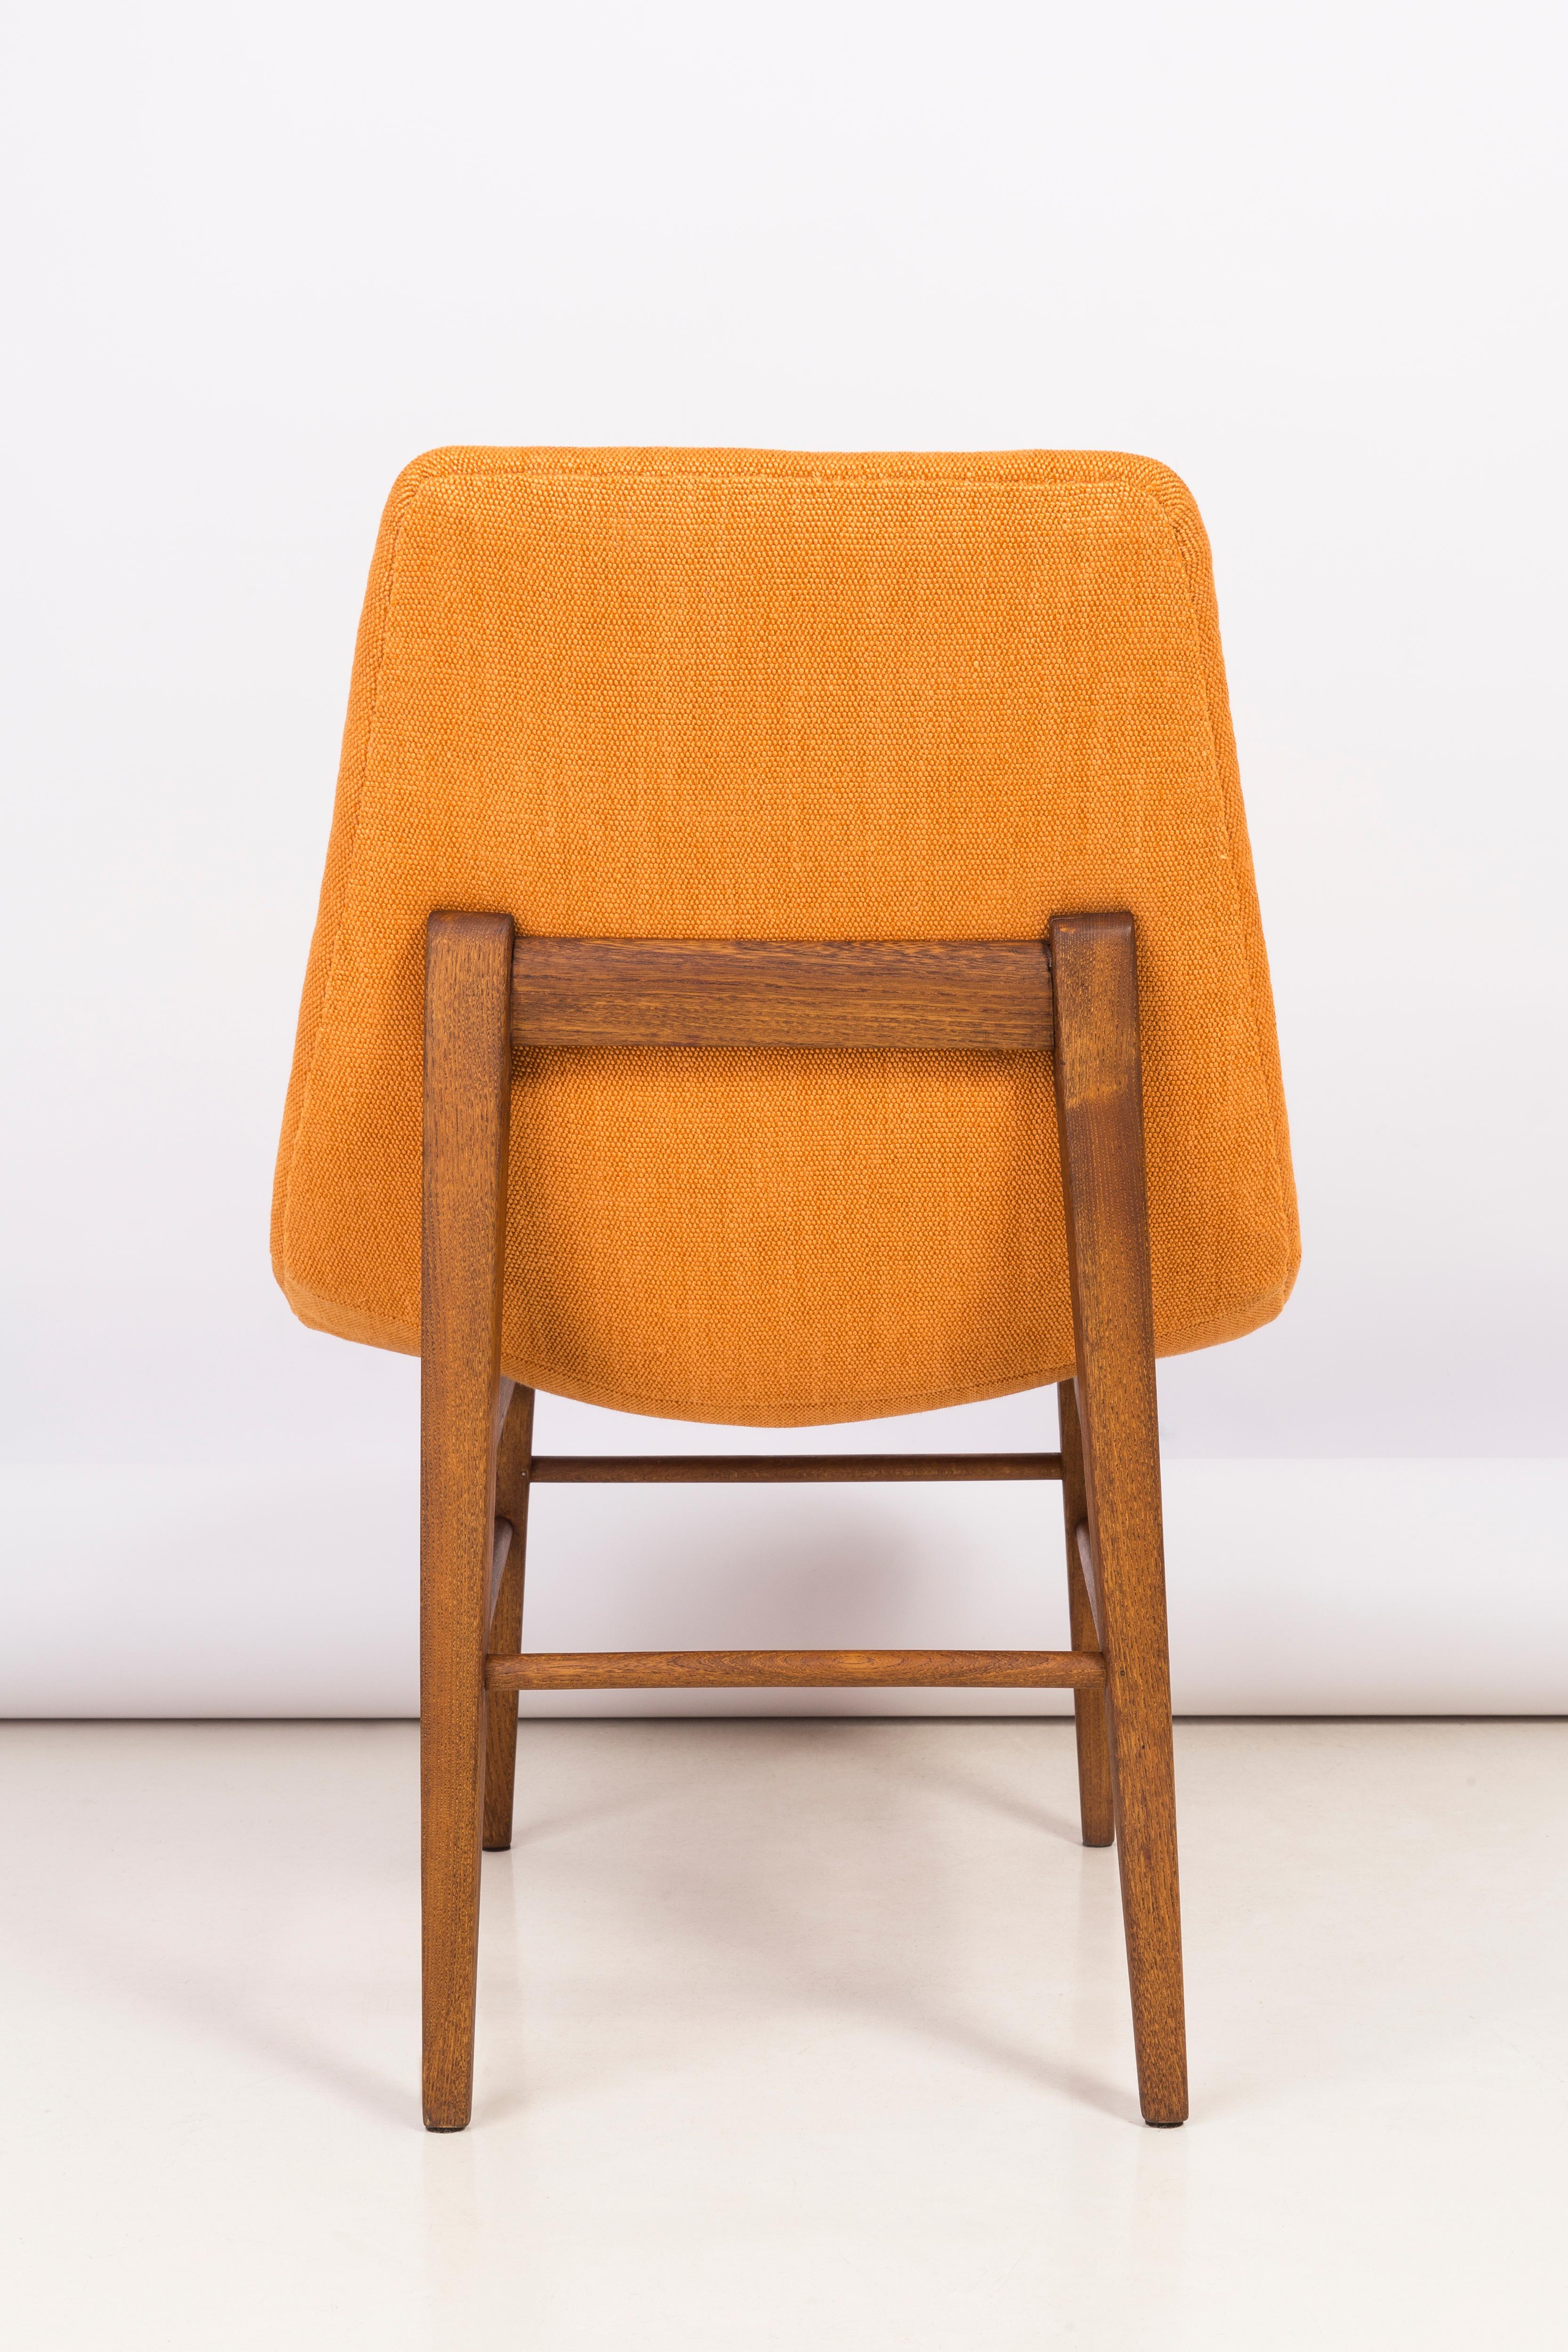 Set of Two Rare 20th Century Orange Shell Chairs, H. Lachert, 1960s For Sale 4